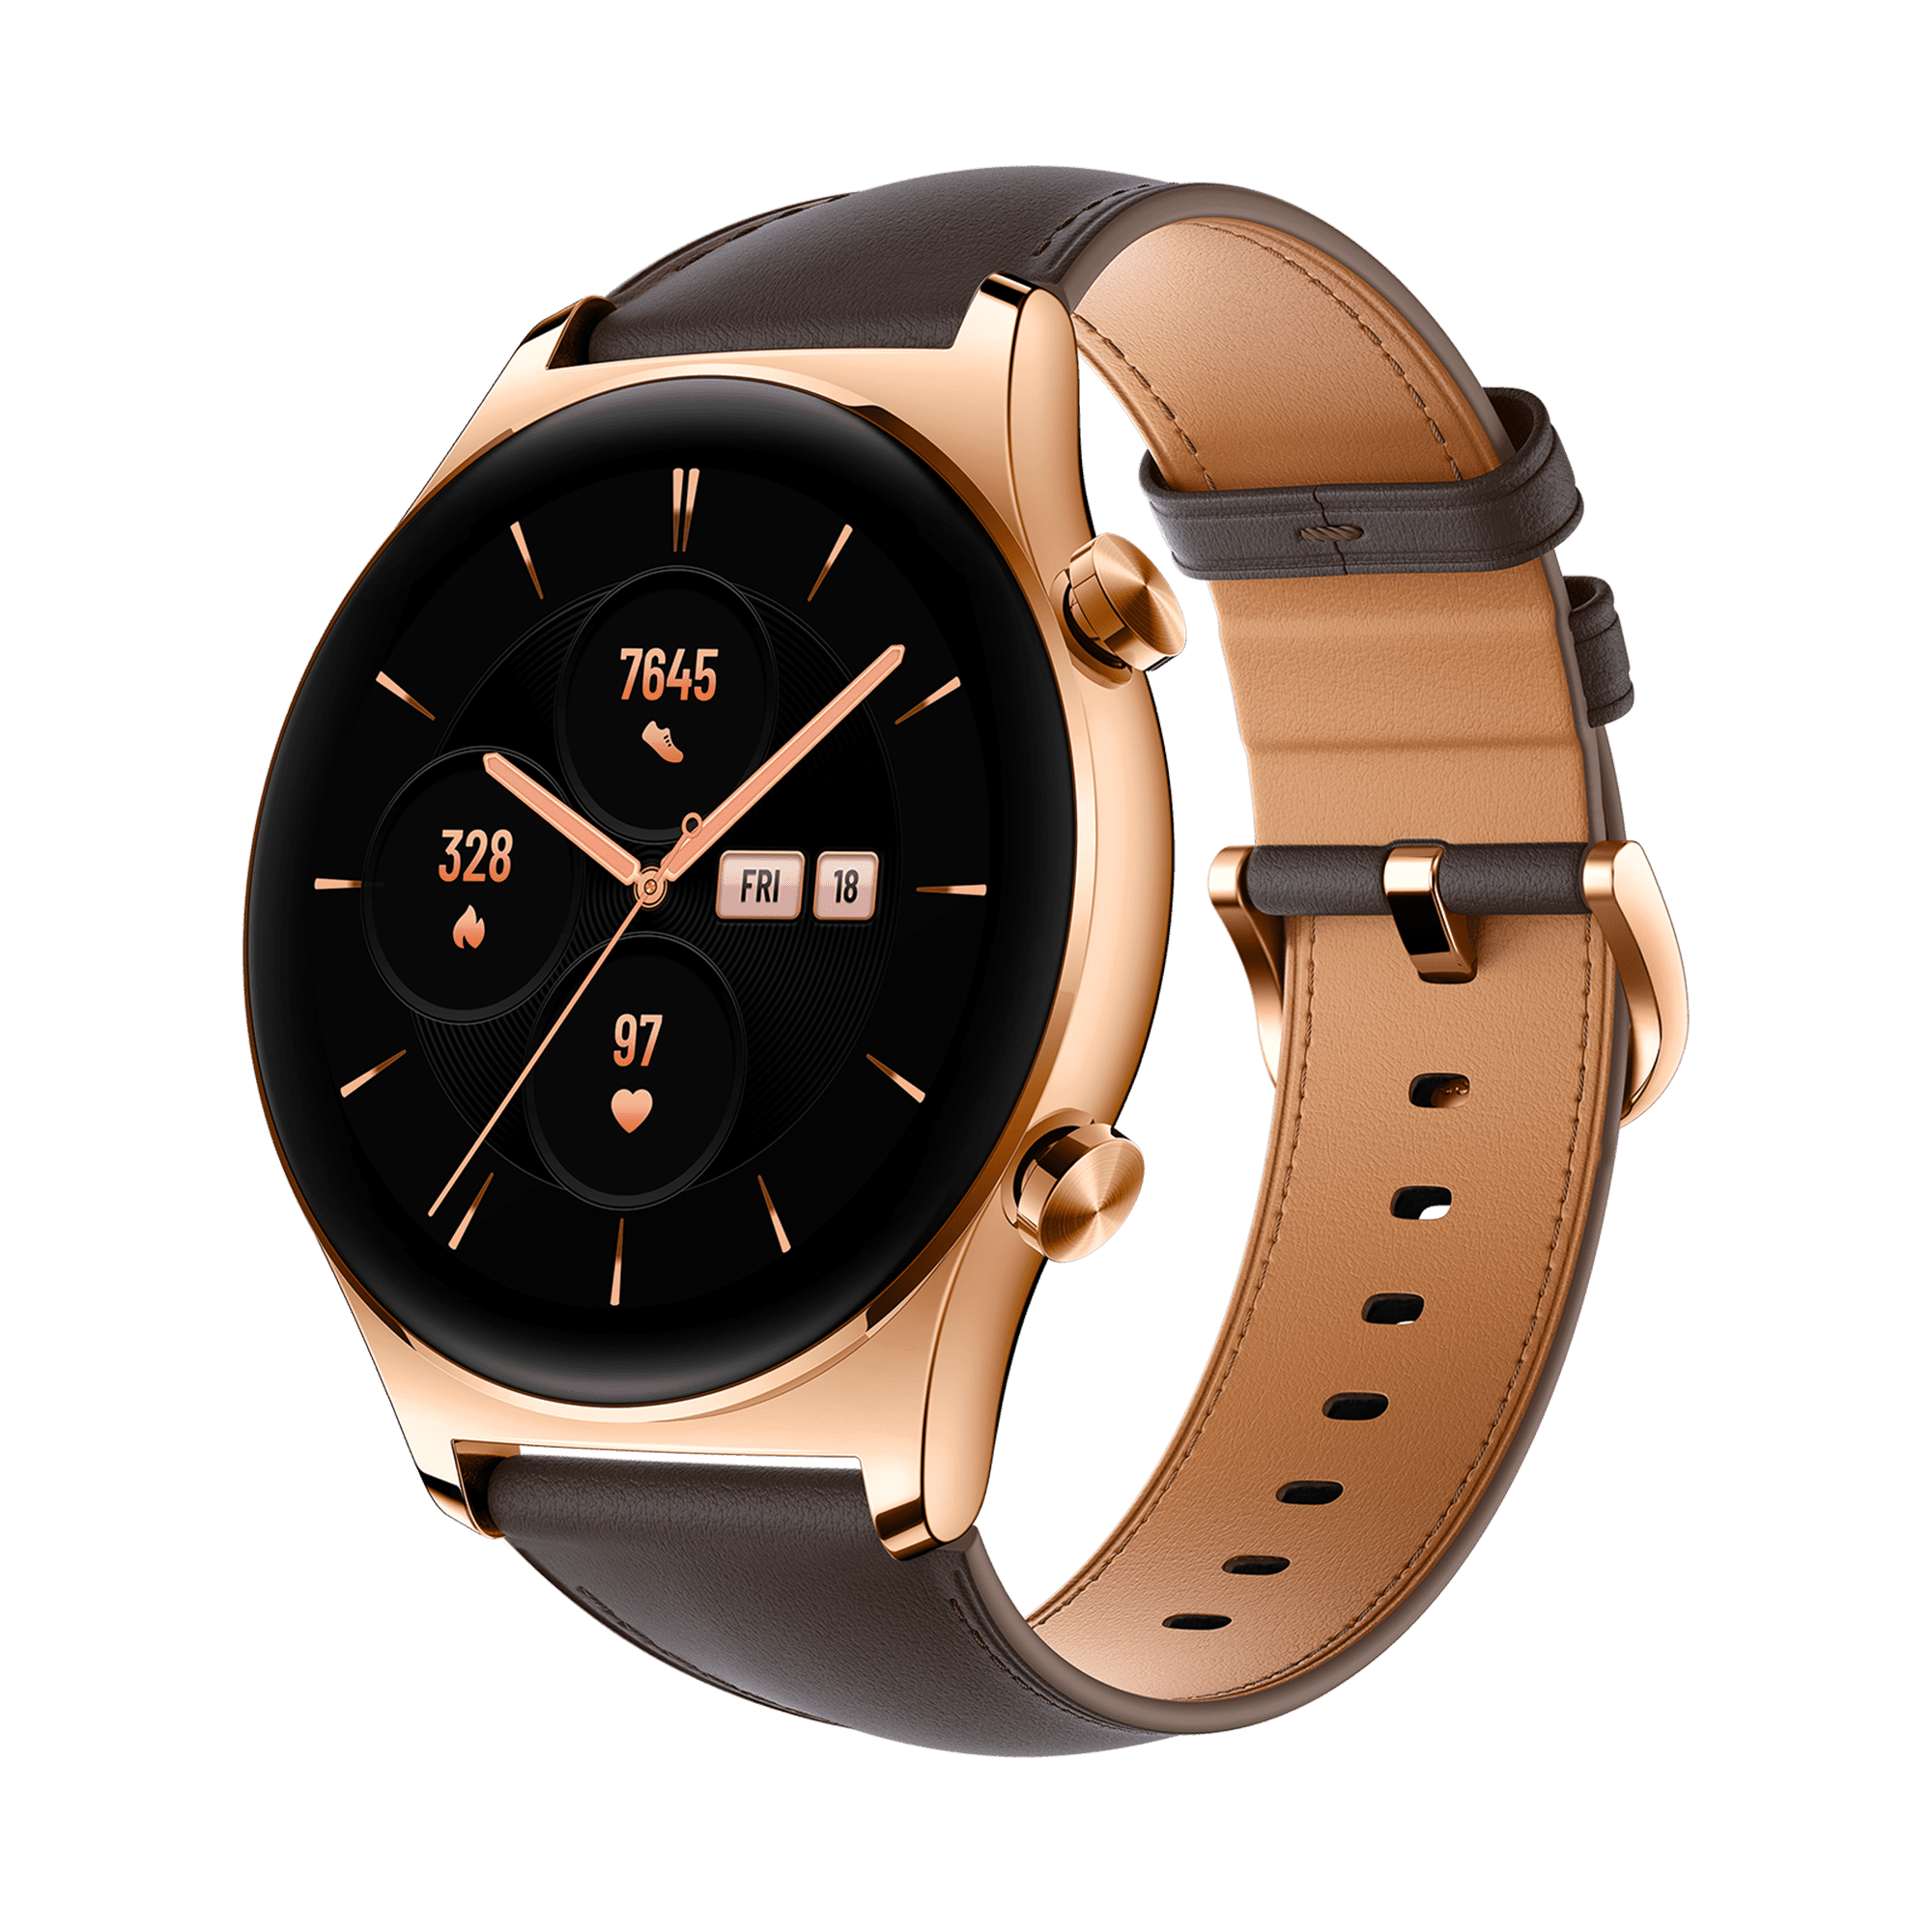 Honor Watch GS 3 announced globally: Price, Specifications